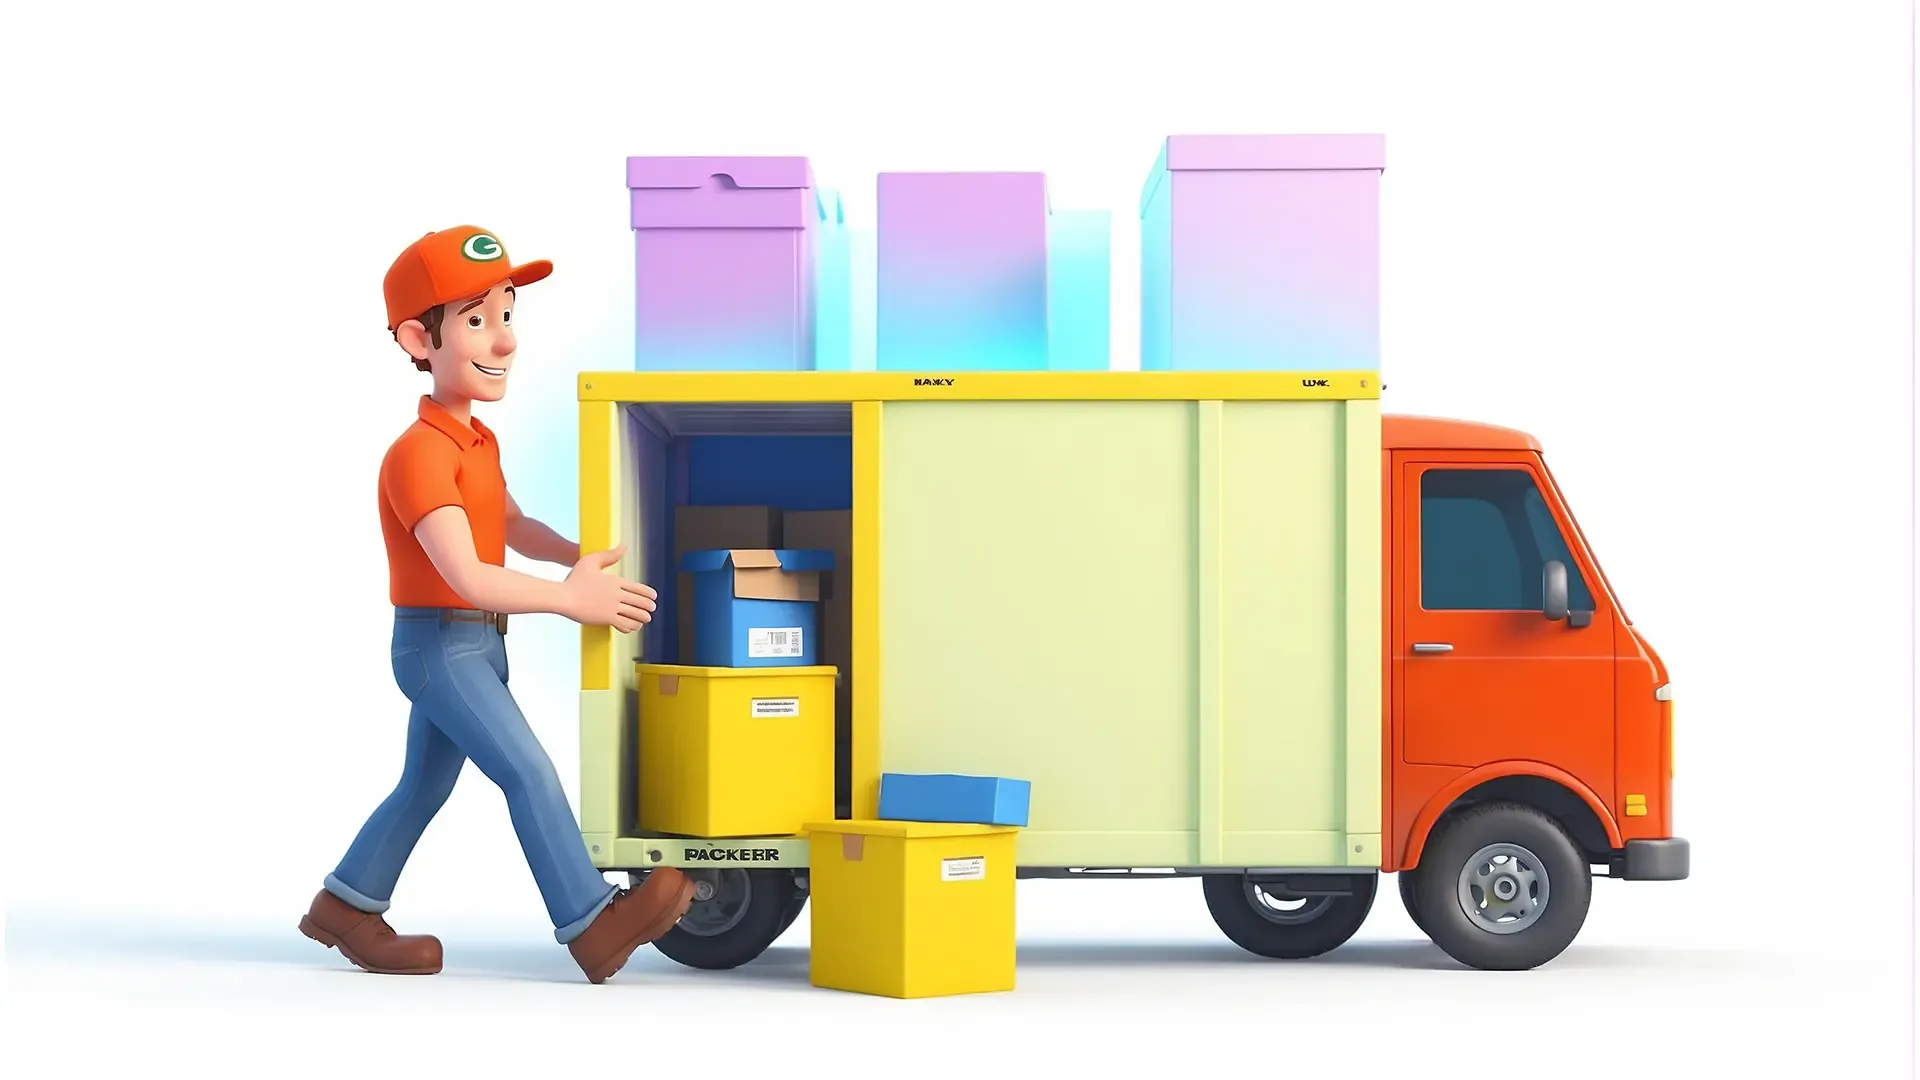 Courier Service Concept Delivery Boy 3D Character Illustration image